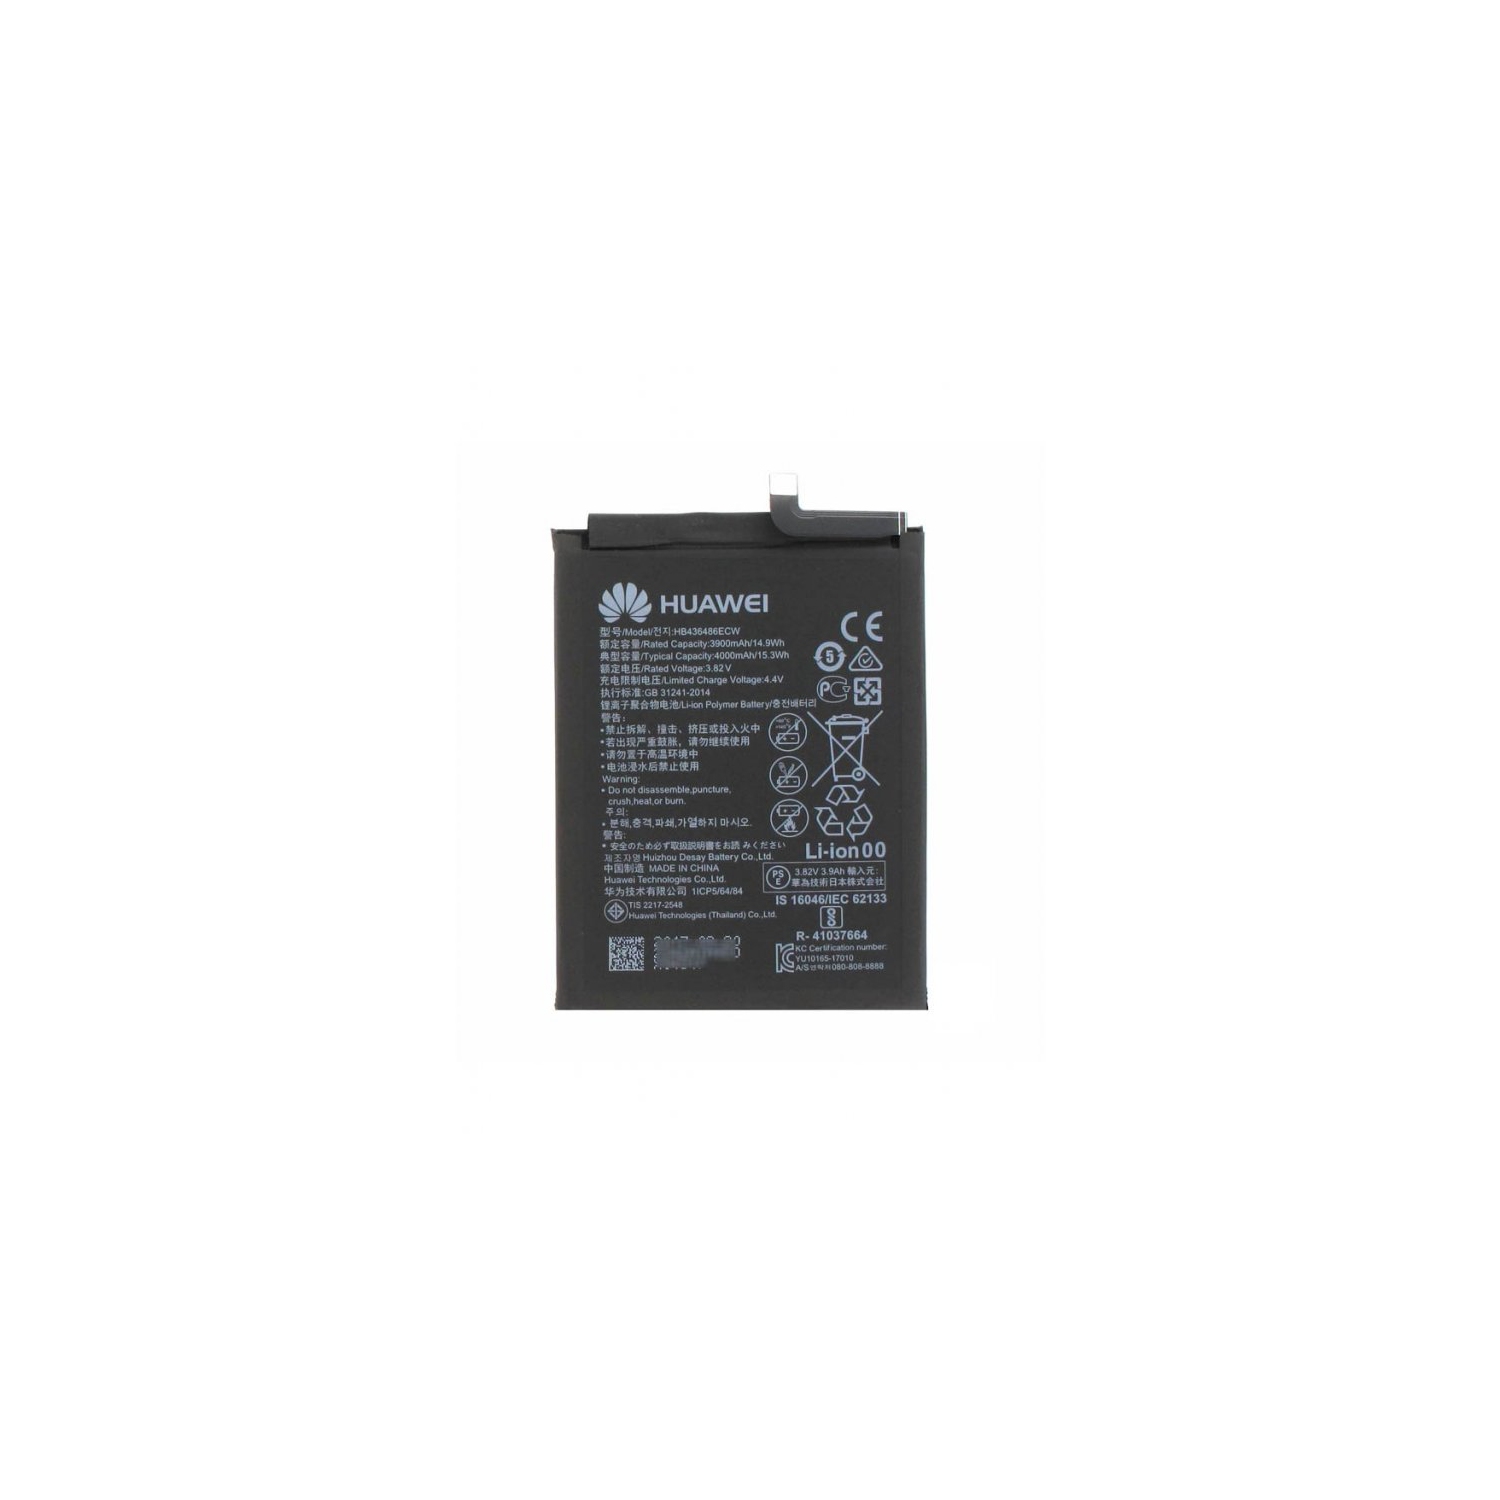 Replacement Battery for Huawei Mate 10 / Mate 10 Pro / Mate 10 Pro lite / Mate X / Mate P20 Pro, HB436486ECW